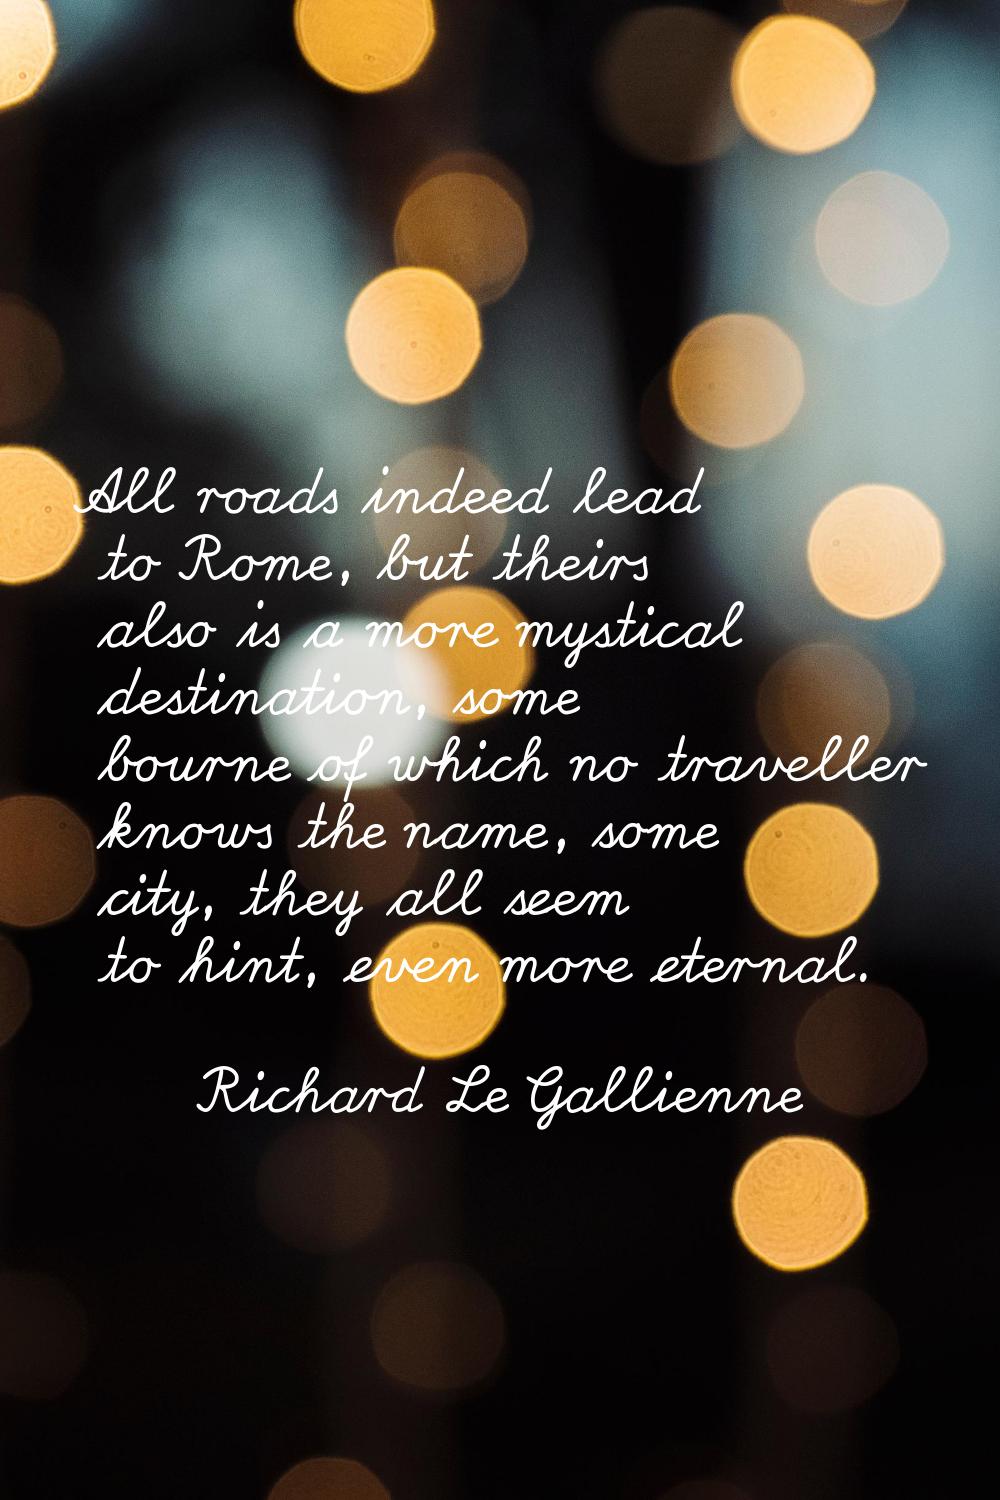 All roads indeed lead to Rome, but theirs also is a more mystical destination, some bourne of which